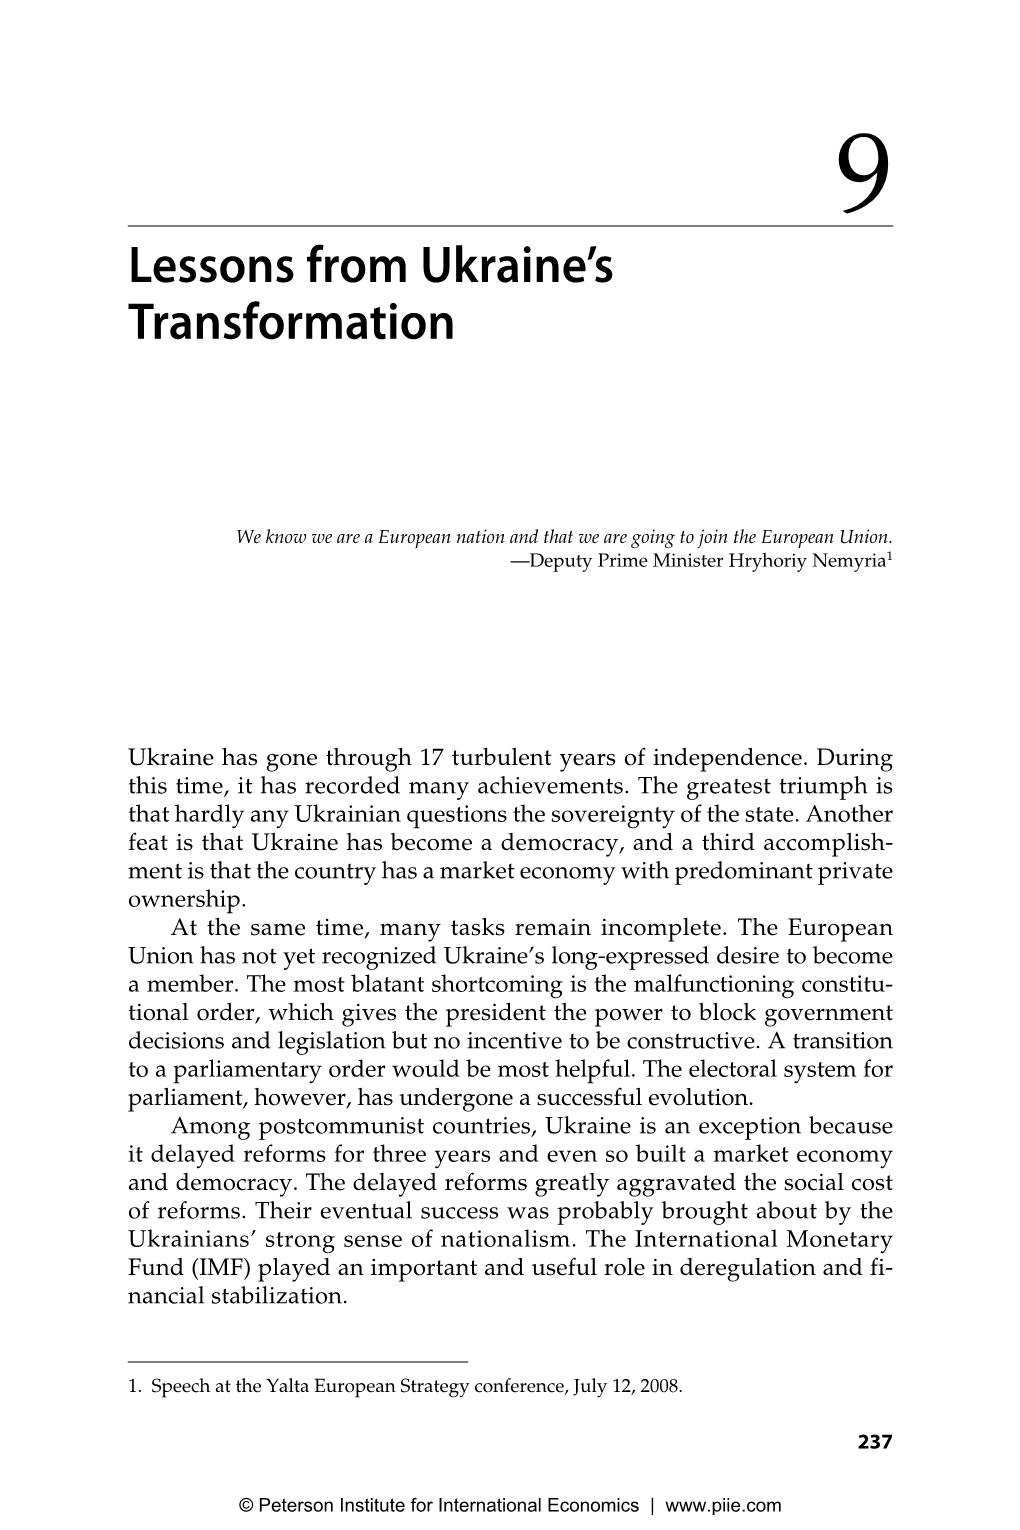 How Ukraine Became a Market Economy and Democracy Chapter